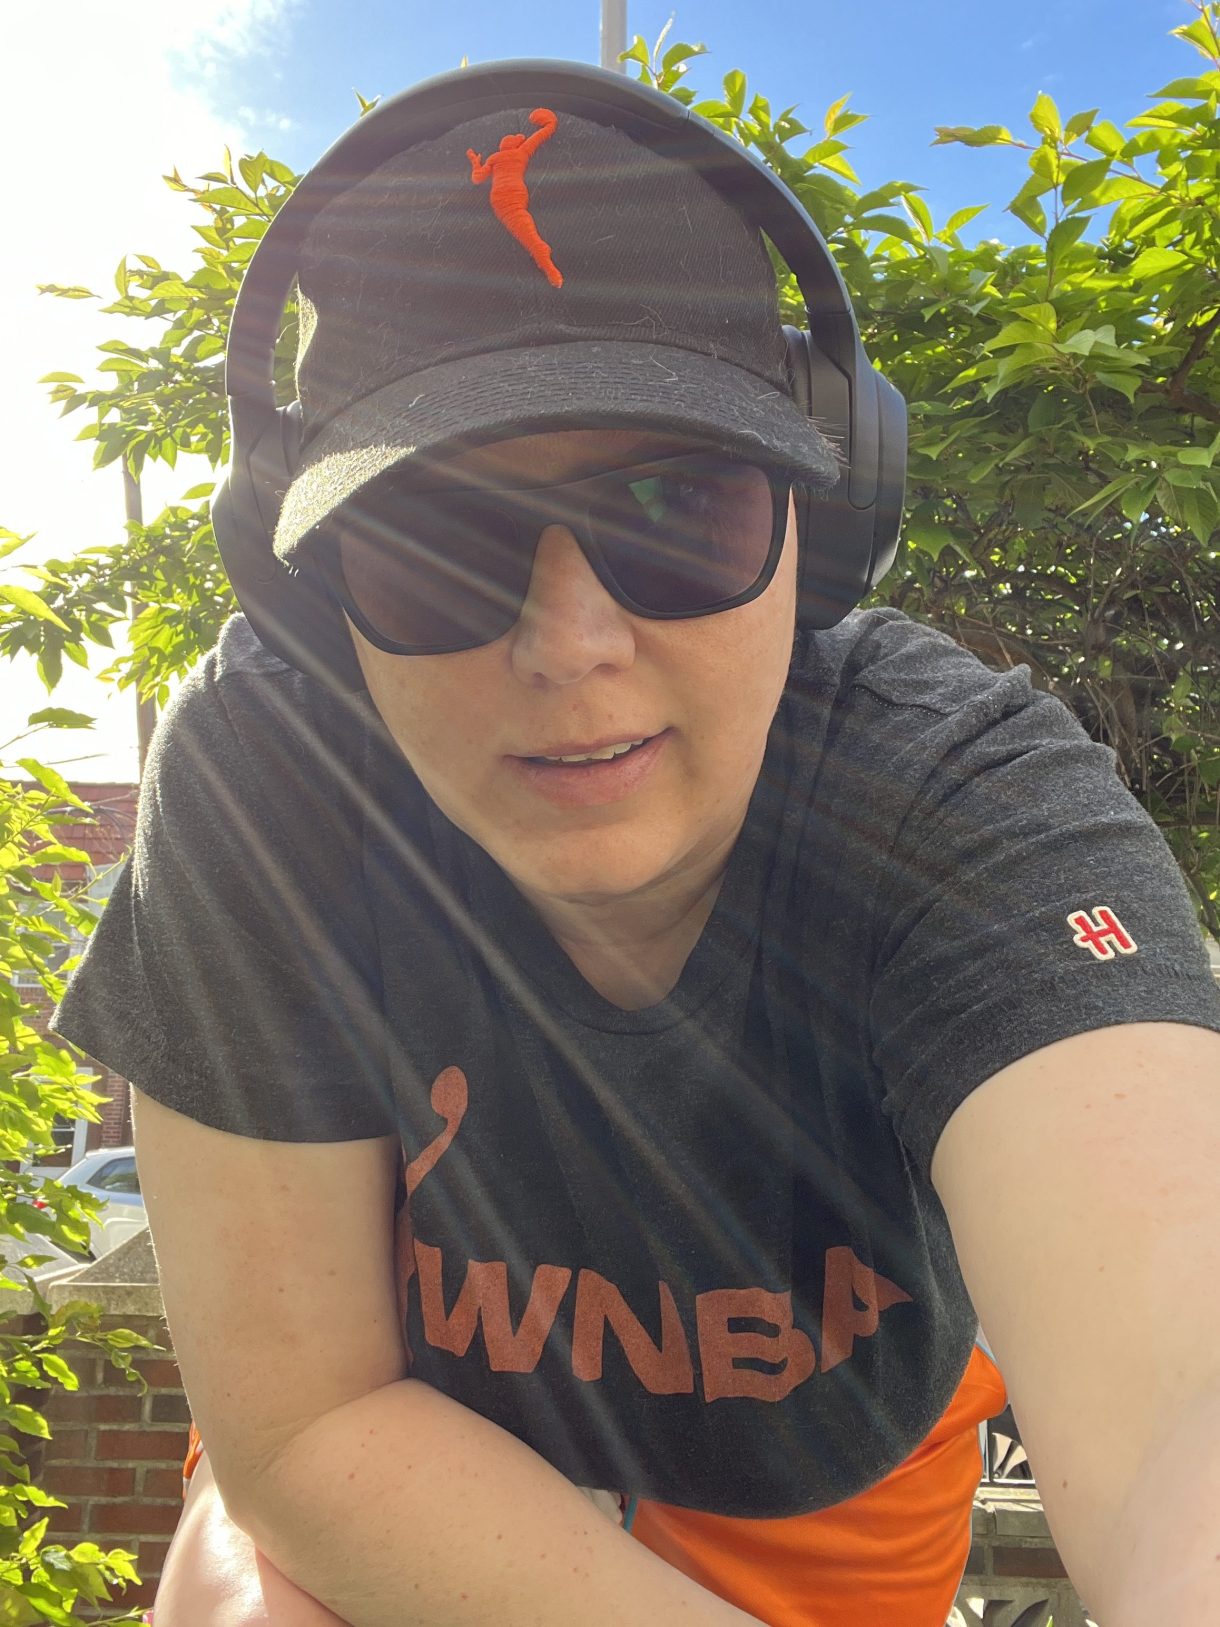 Heather, a soft butch white woman leans forward in sunglasses, headphones, and full WNBA regalia from hat to tee shirt to shorts.